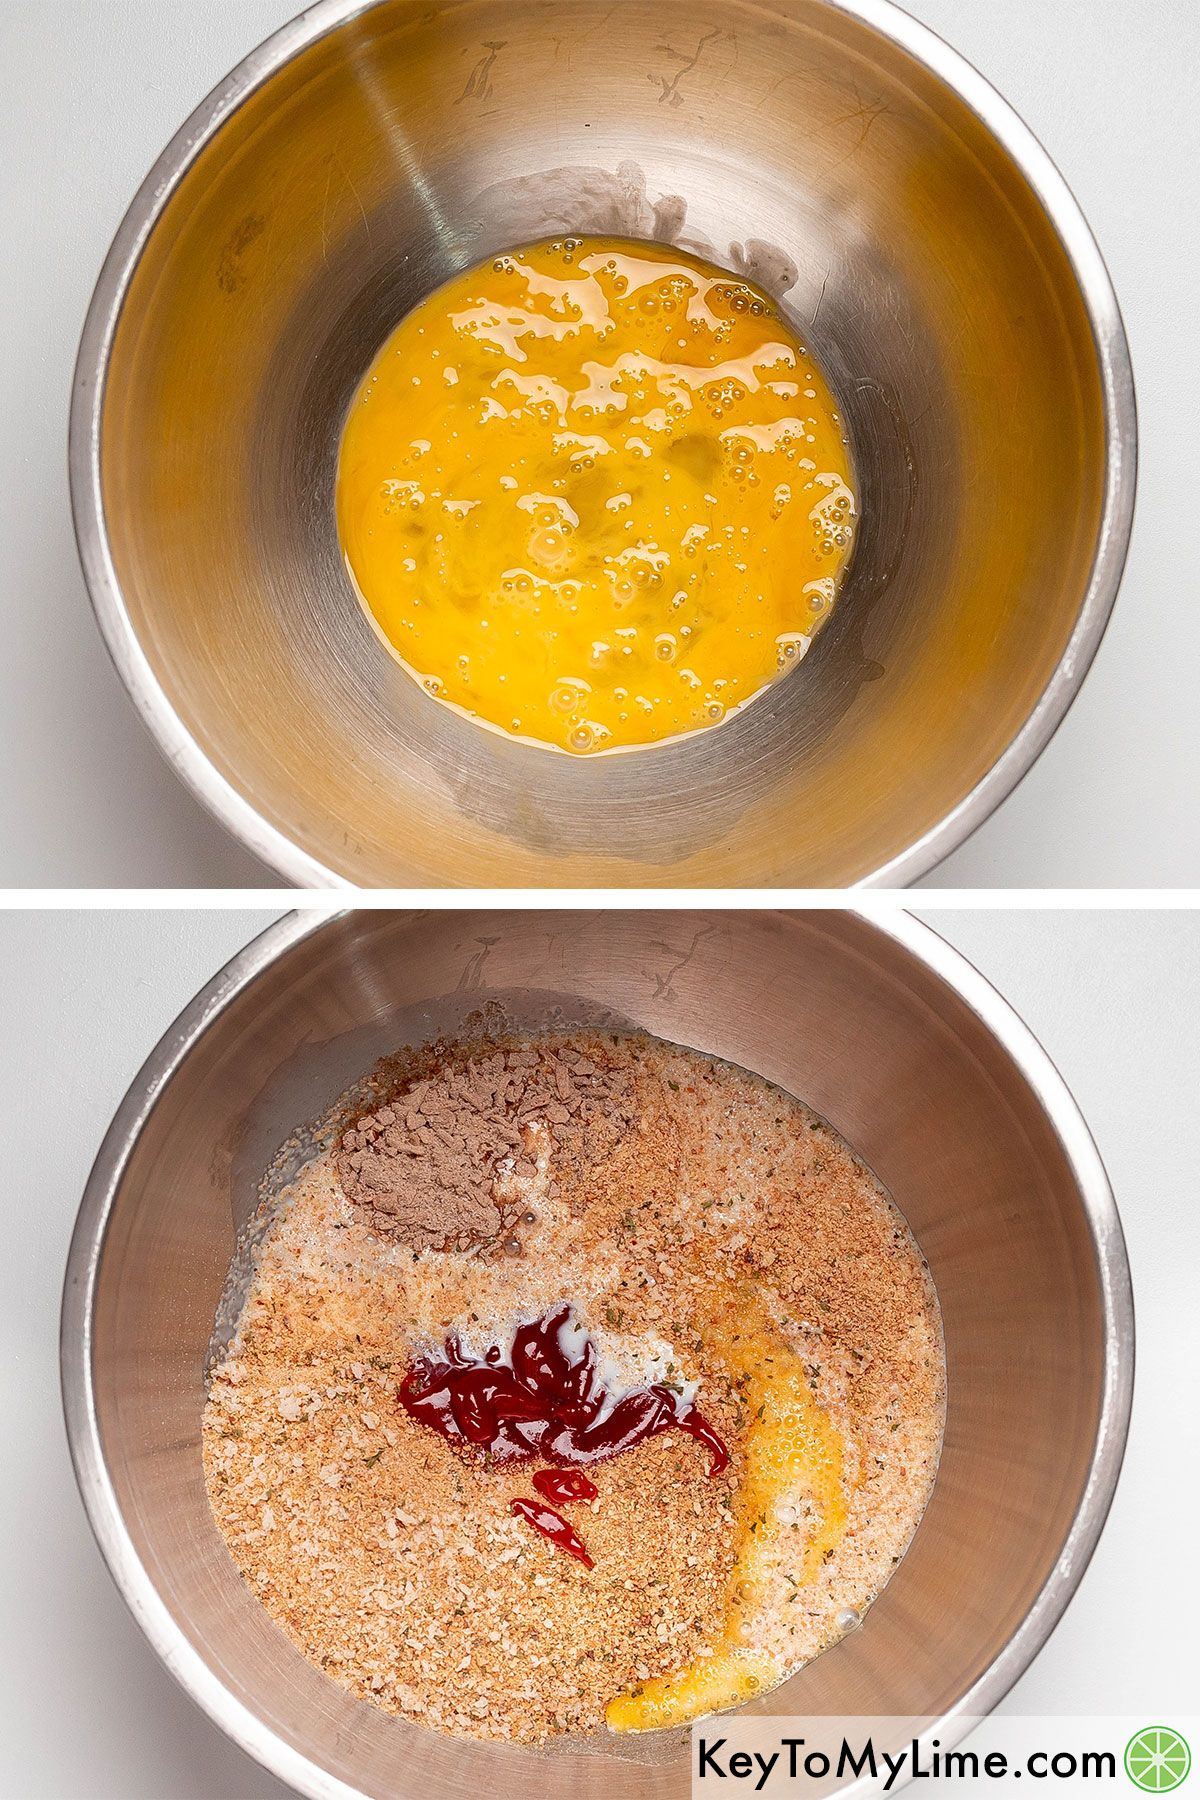 Beating the eggs in a mixing bowl, then adding breadcrumbs, milk, ketchup, and soup mix in a large mixing bowl.